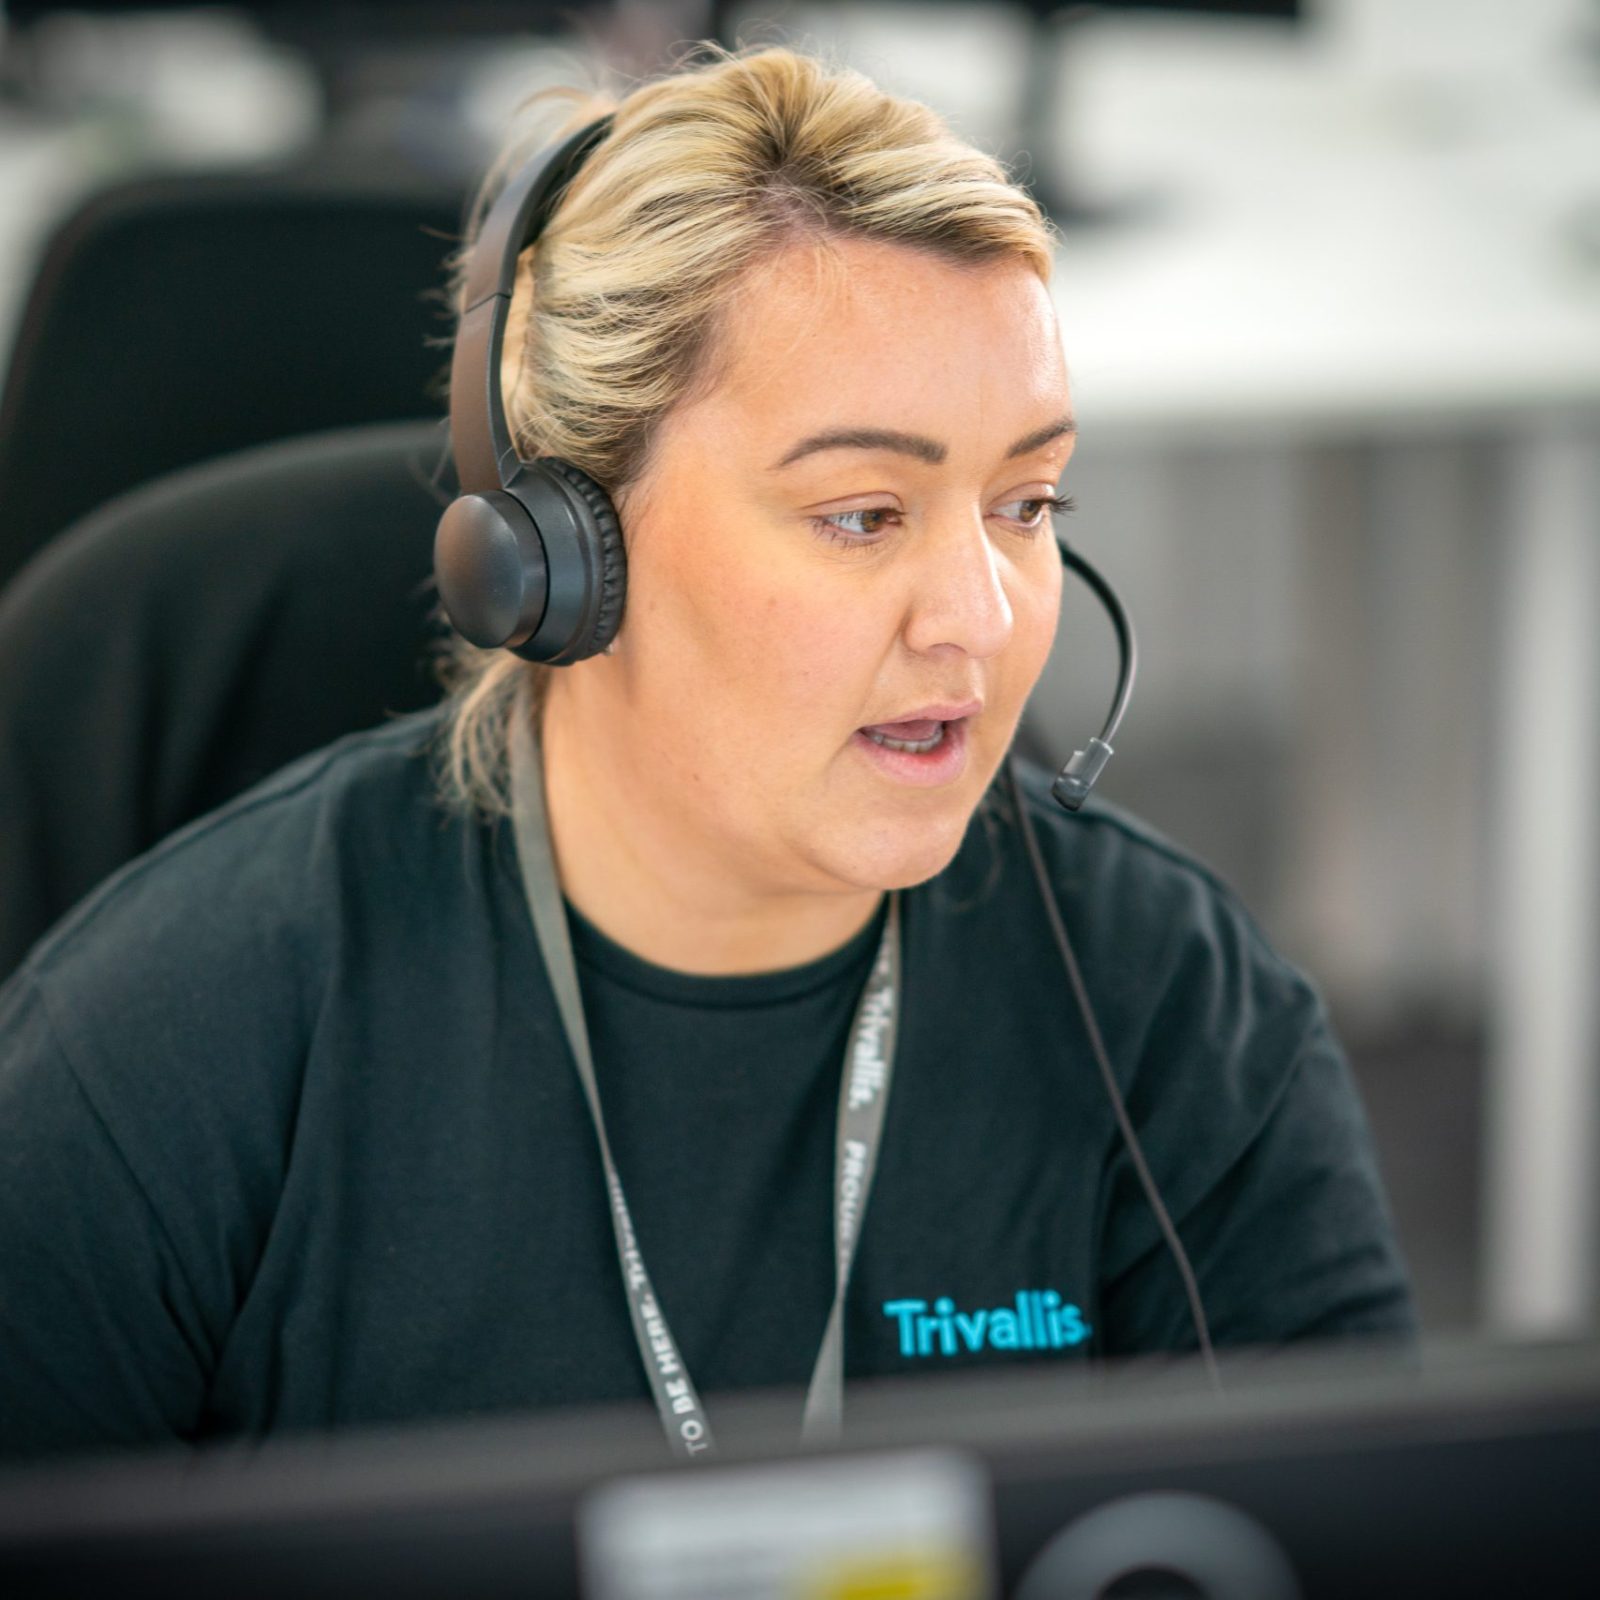 Trivallis Housing Landlord Wales A woman with short blonde hair, wearing a black t-shirt and headset, working at a computer in an office setting. she appears focused on her task. the name 